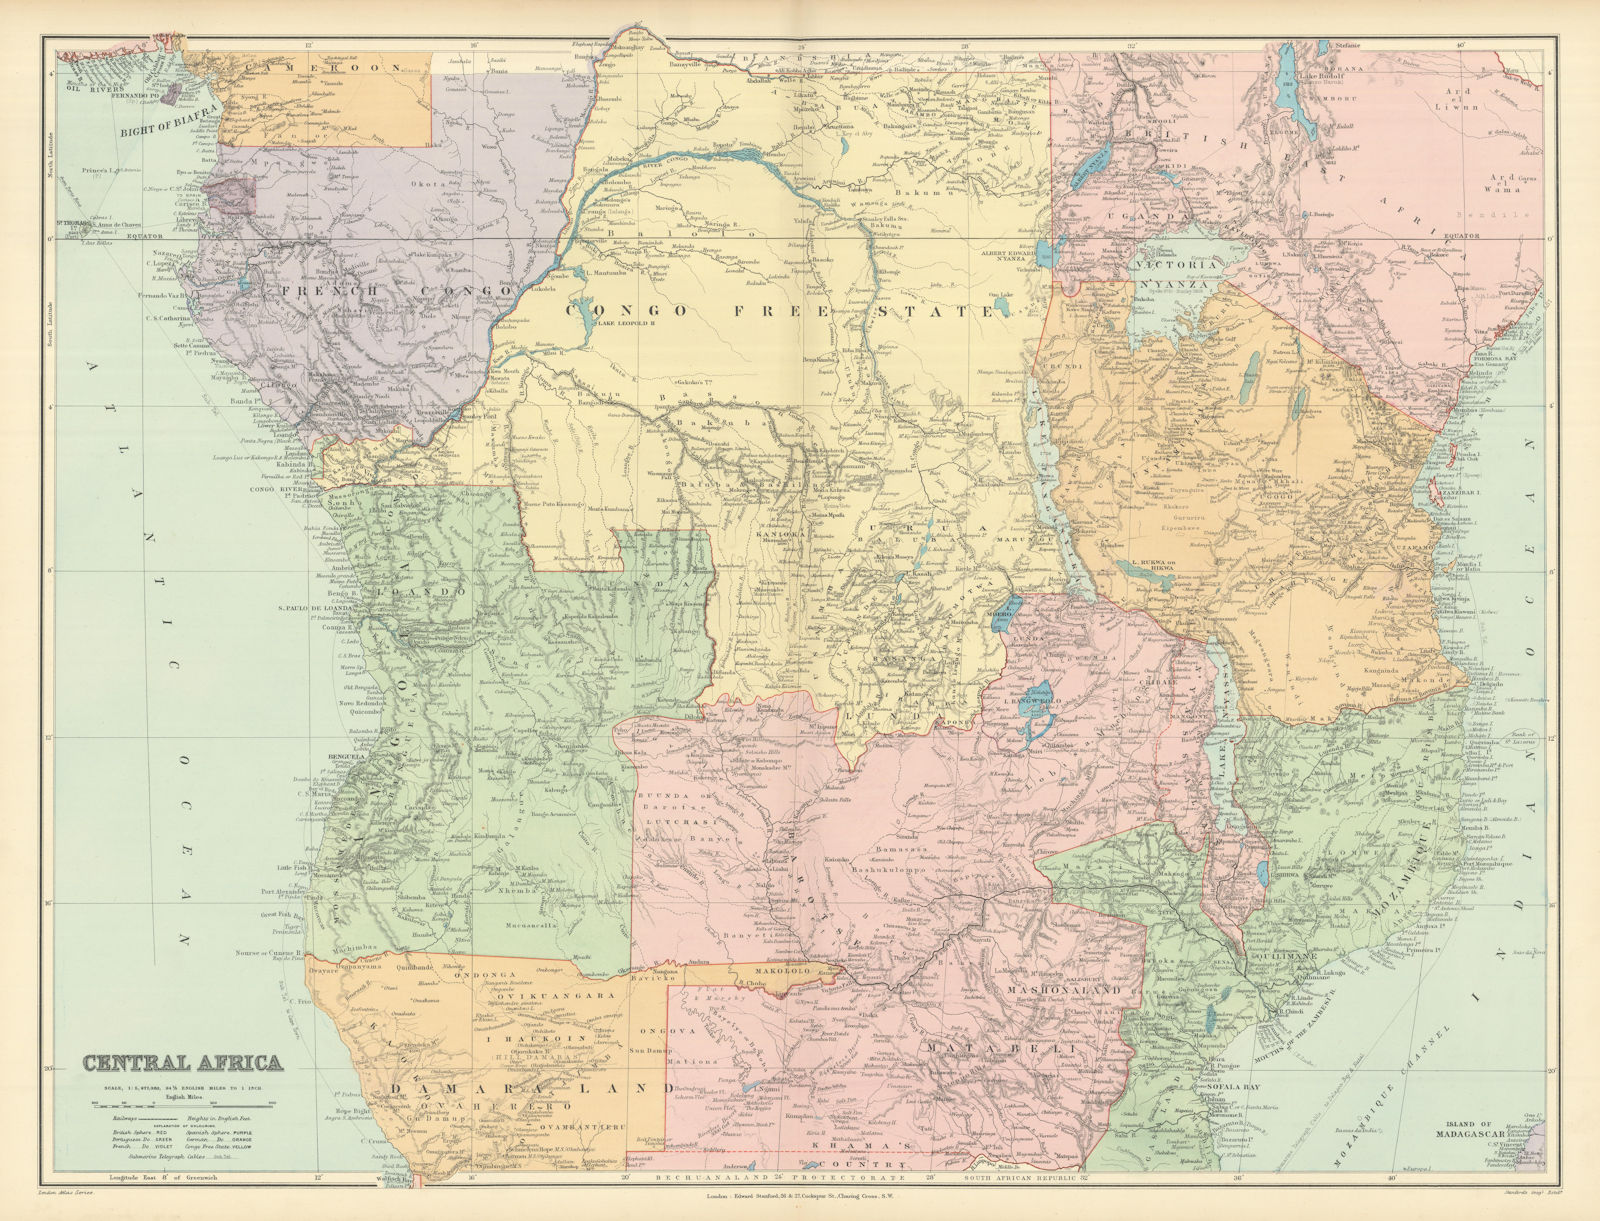 Associate Product Central Africa. Congo Free State Rhodesia German East Africa. STANFORD 1894 map